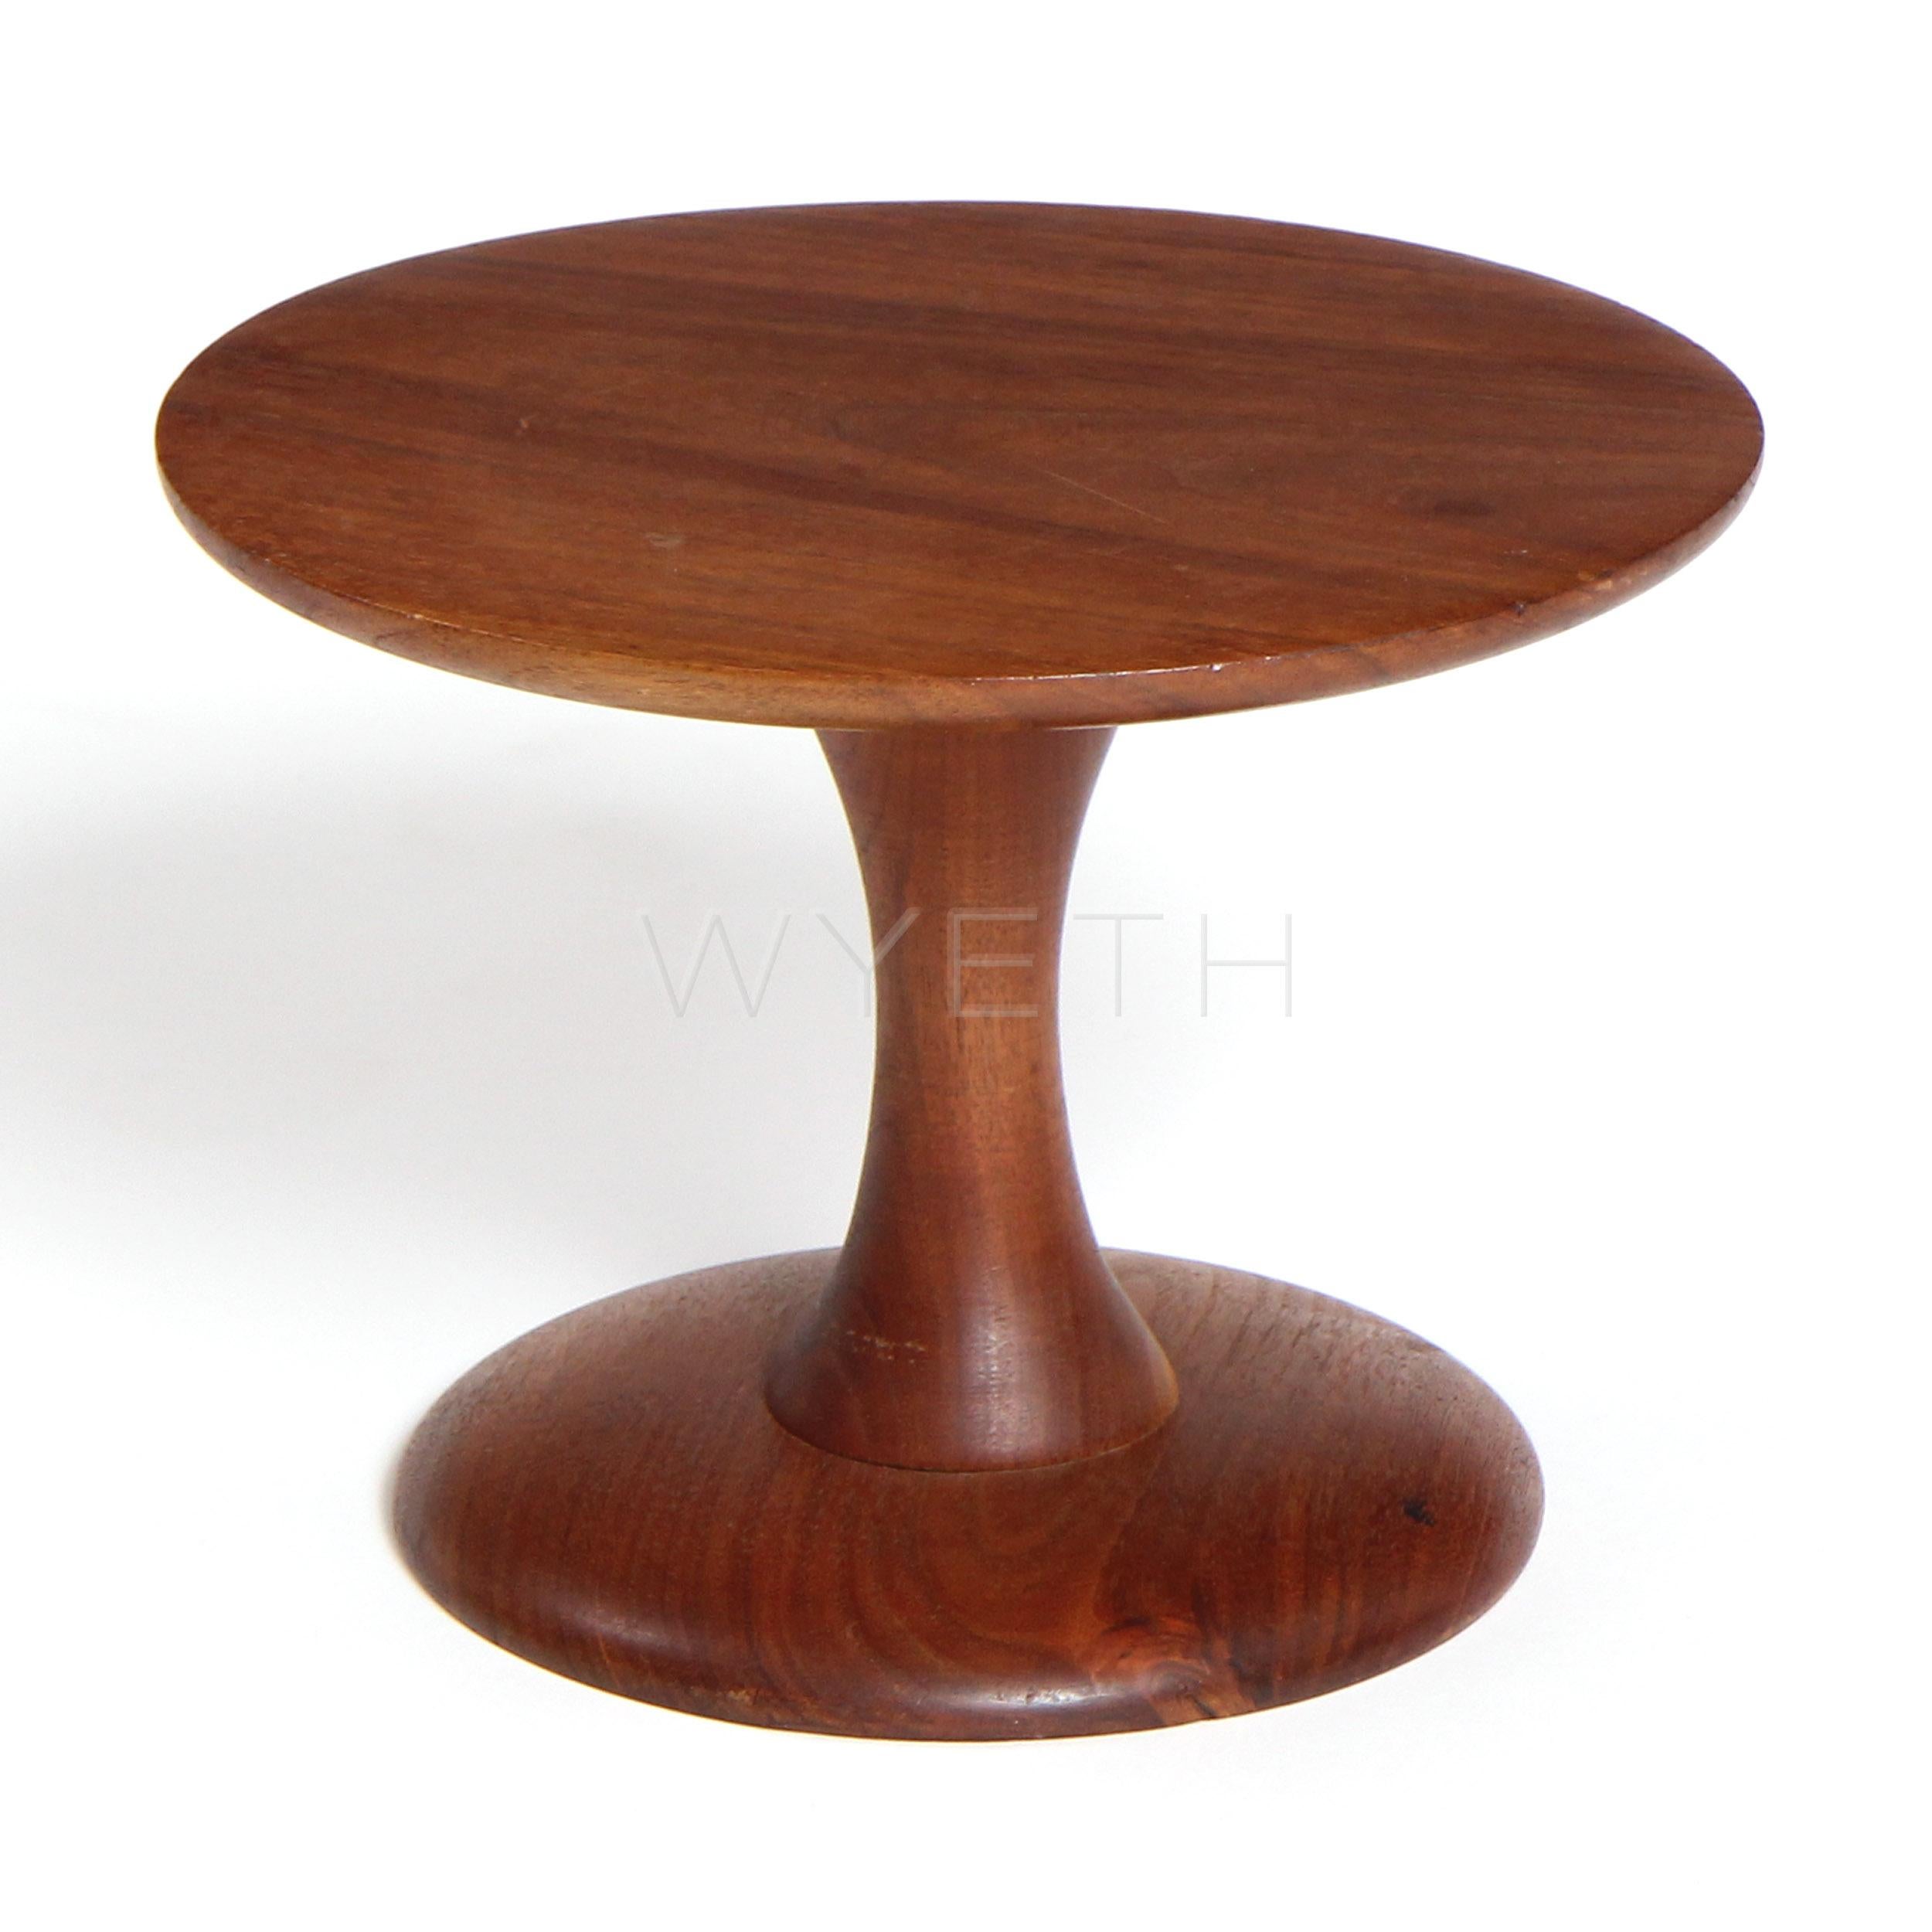 A small walnut turned pedestal or children's stool.